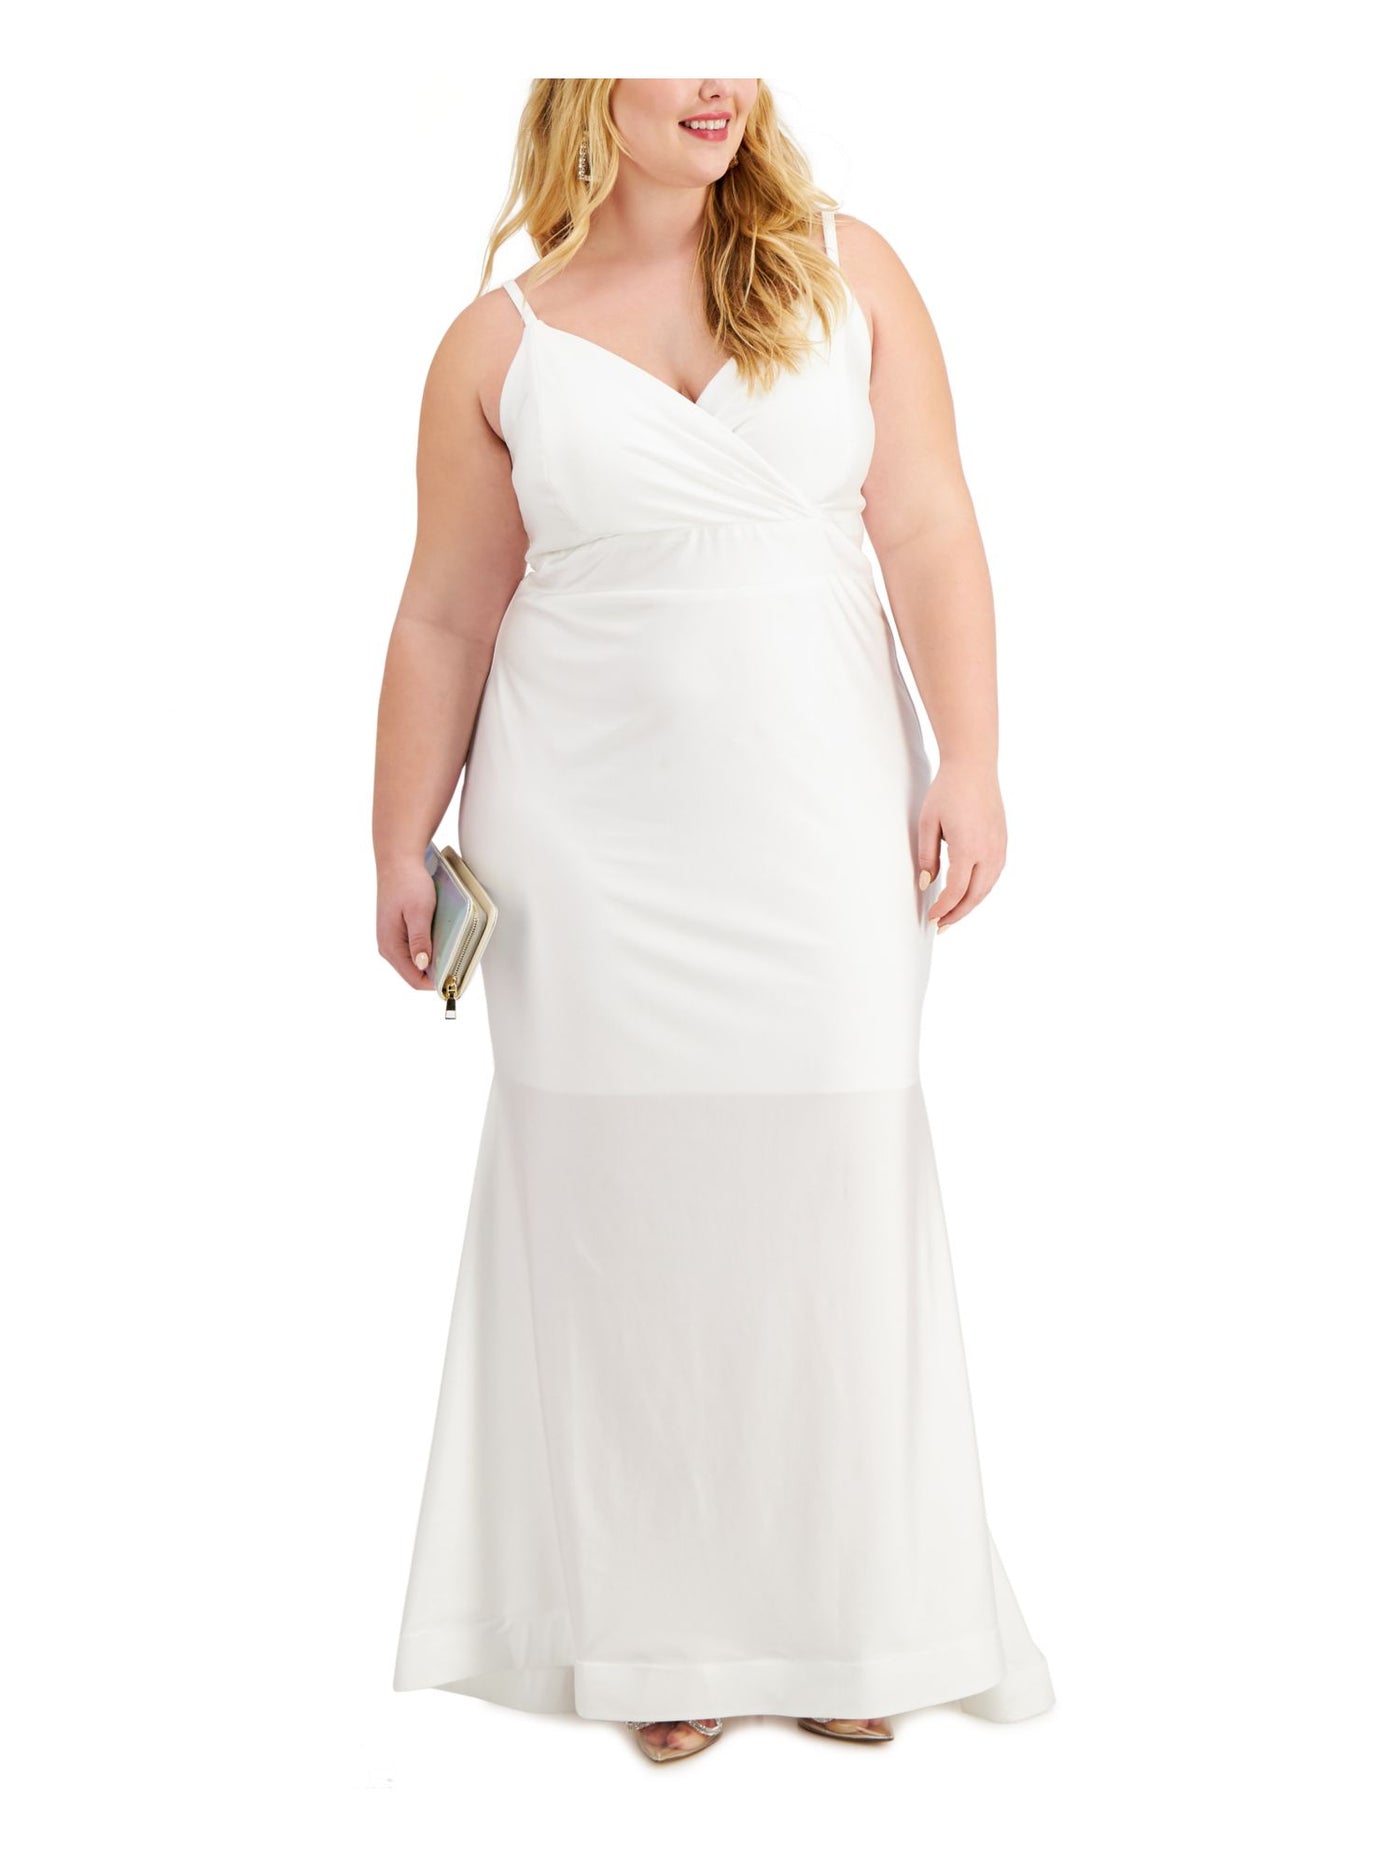 R&M RICHARDS Womens White Ruched Spaghetti Strap Surplice Neckline Full-Length Evening Fit + Flare Dress Plus 18W